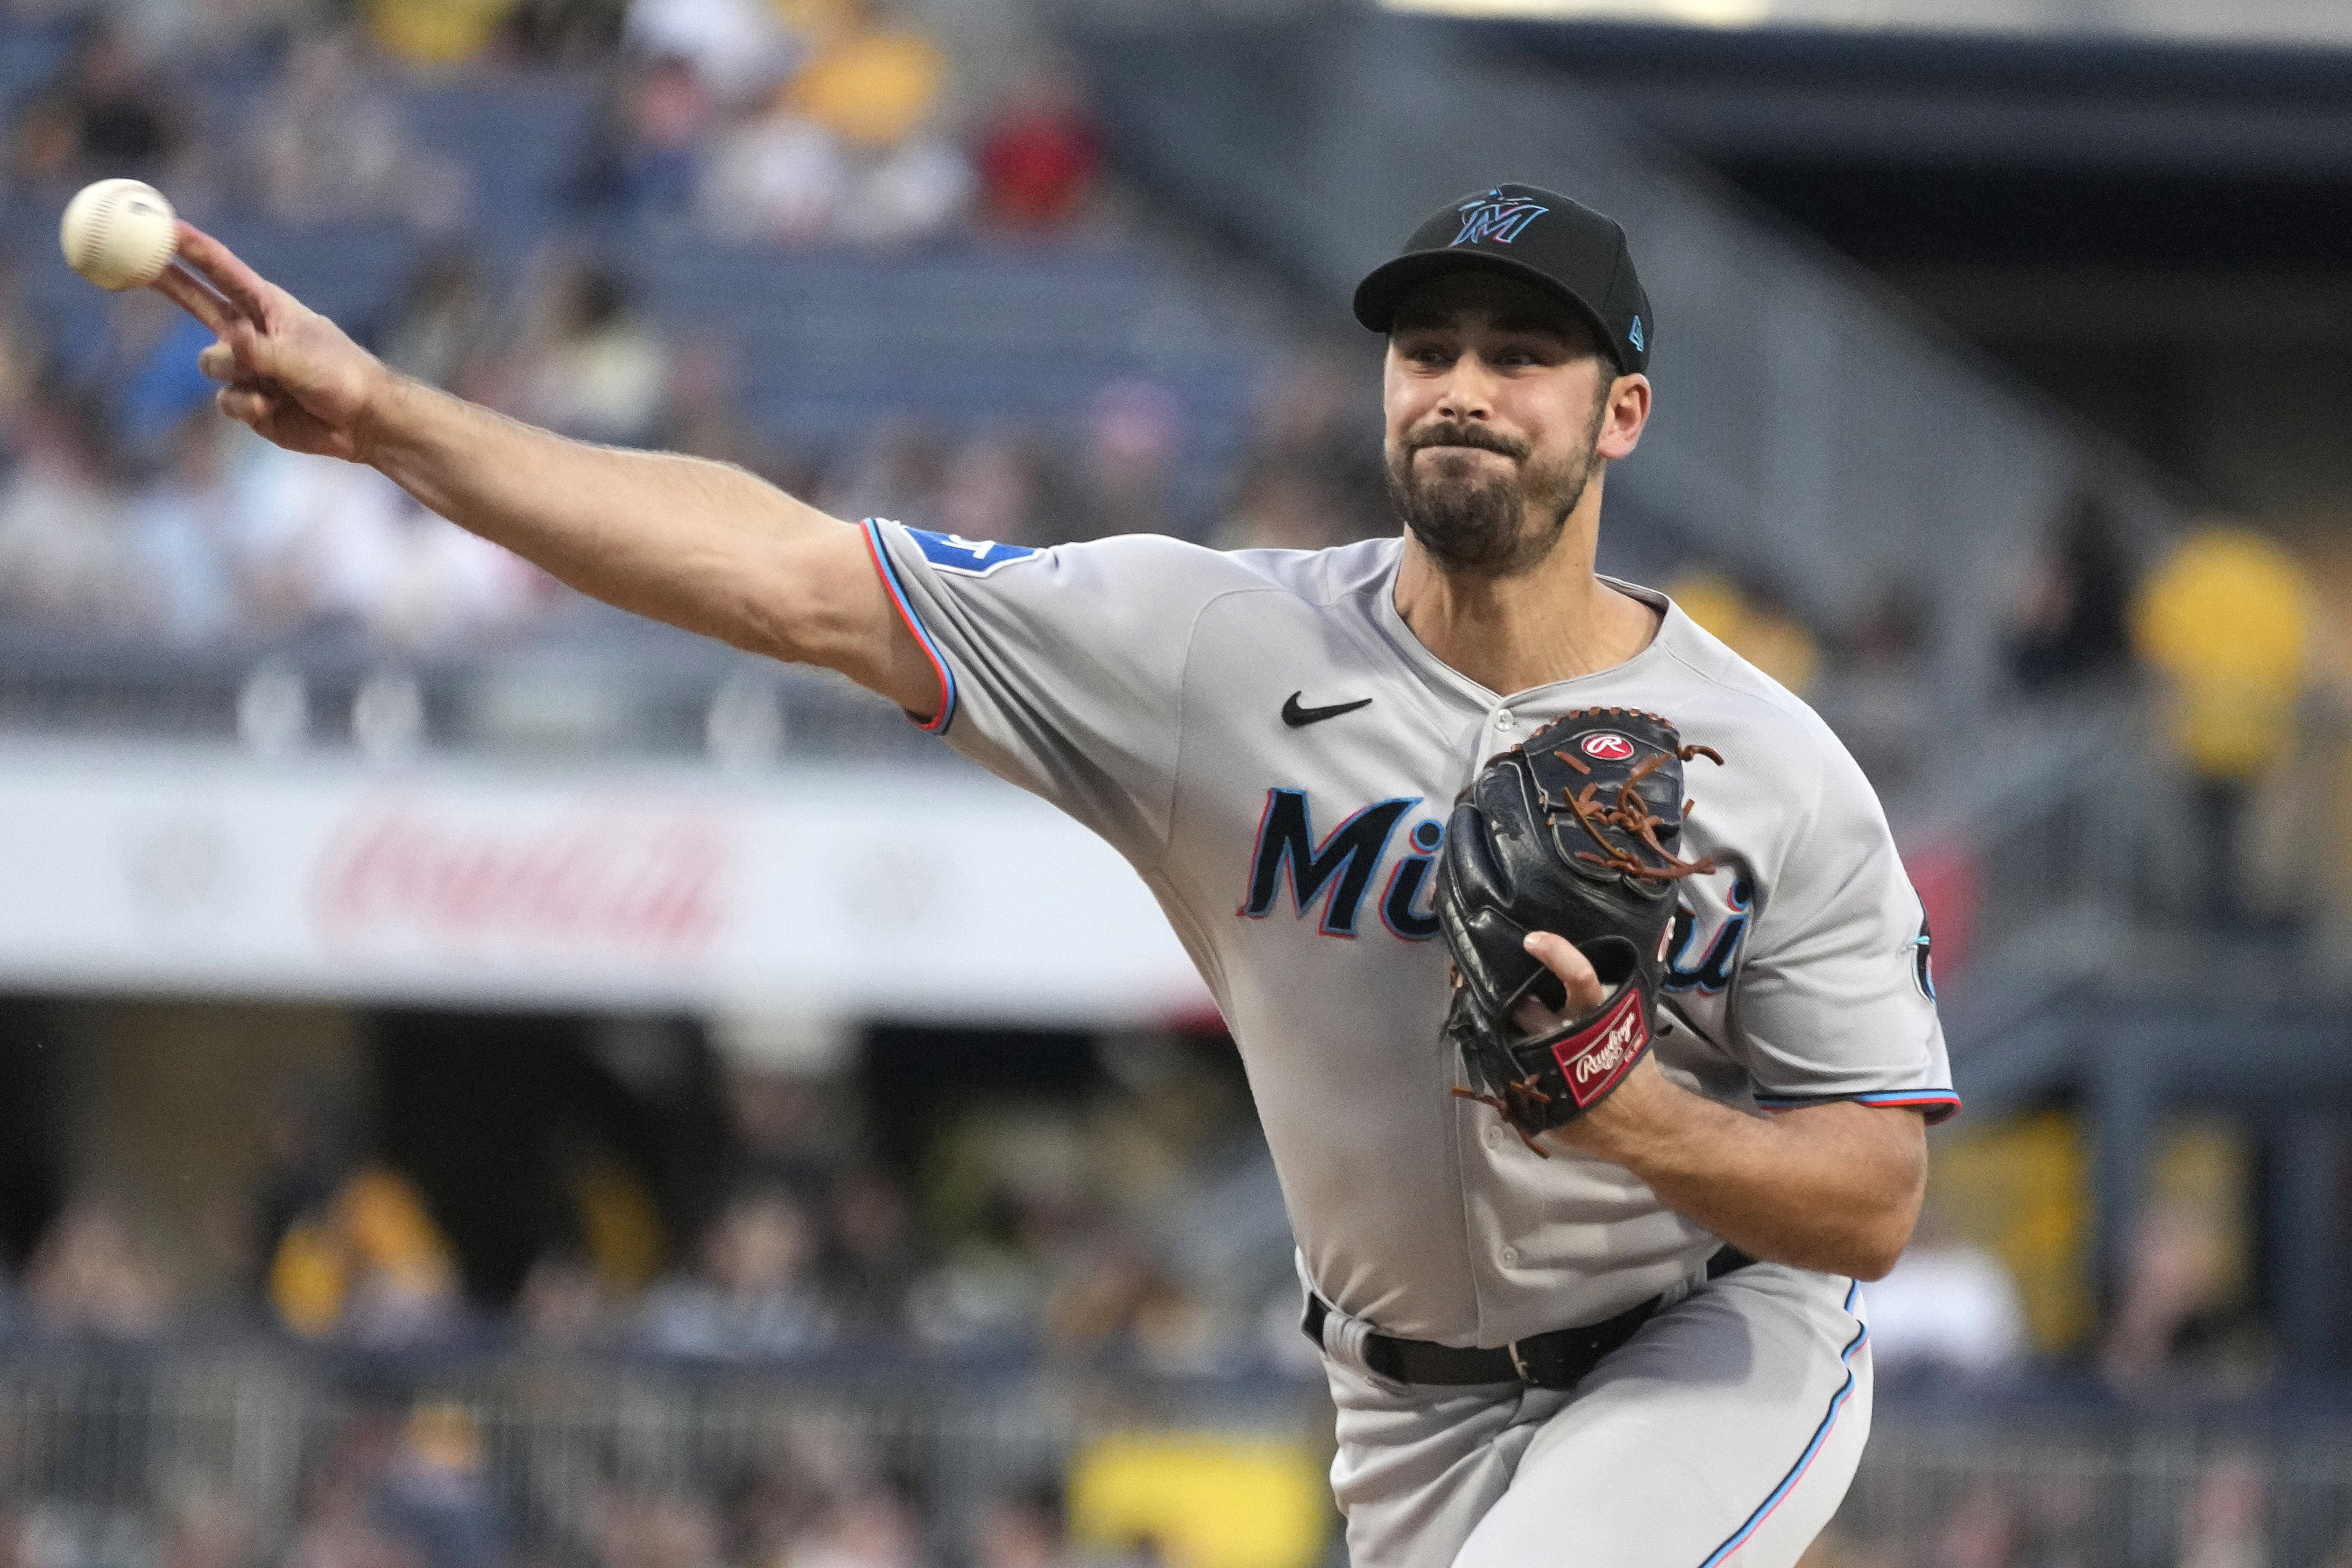 Marlins clinch playoff spot with 7-3 win over Pirates